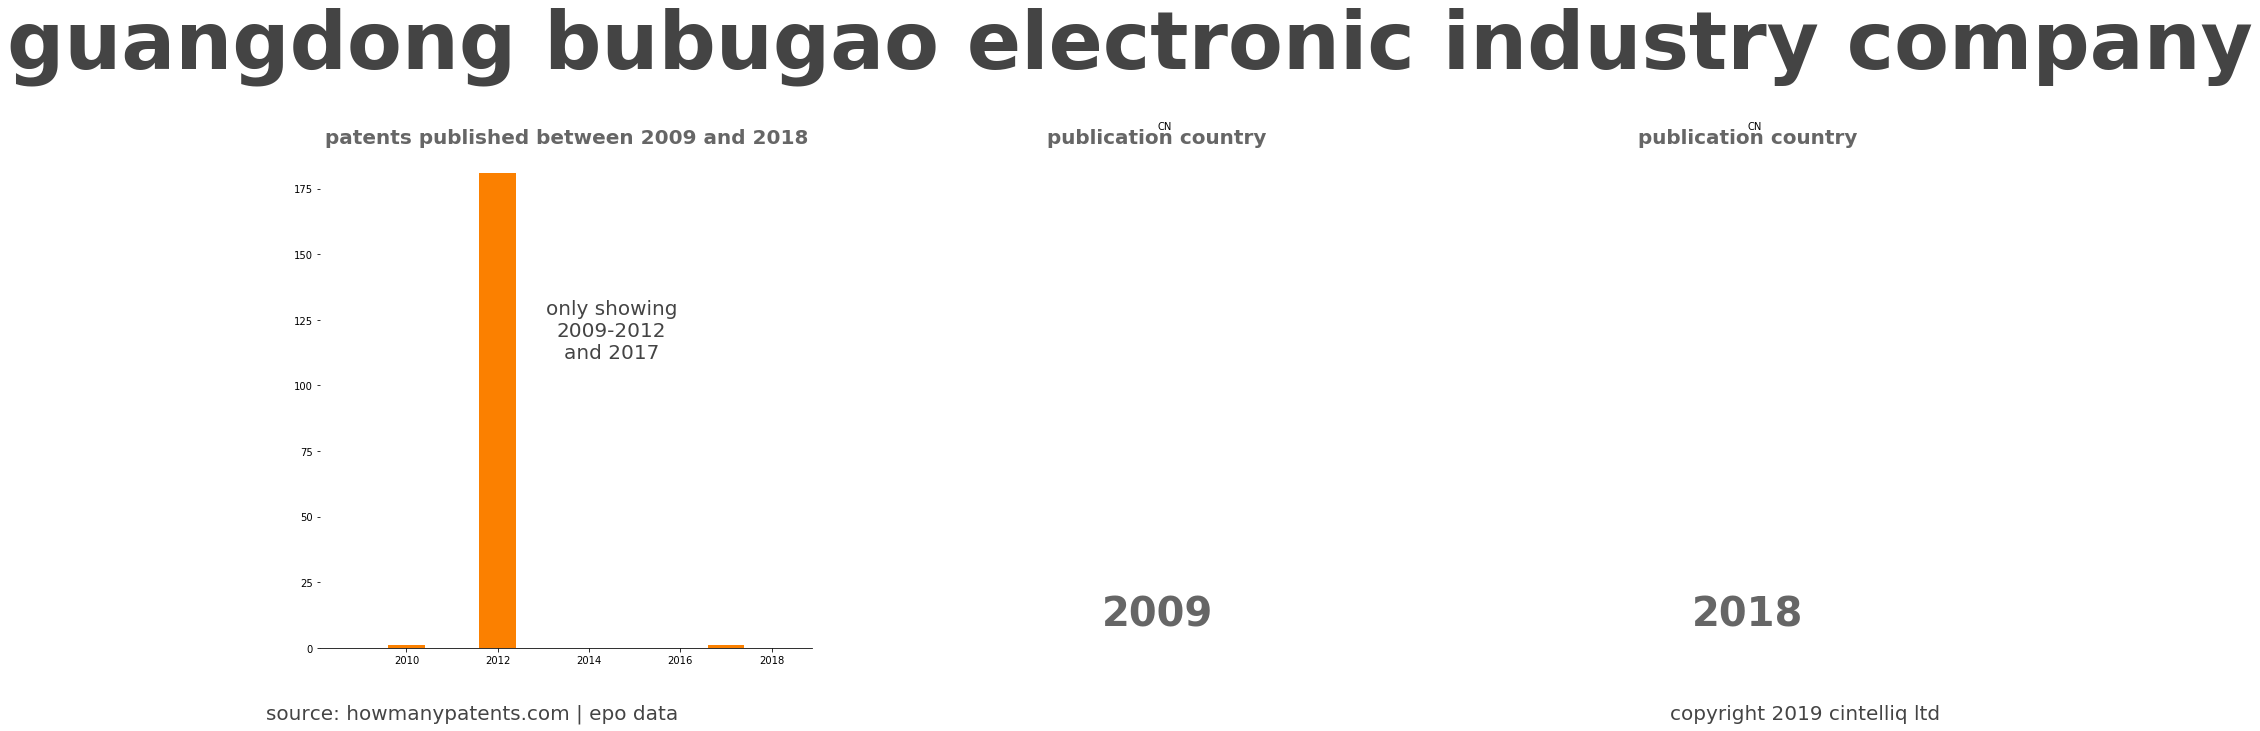 summary of patents for Guangdong Bubugao Electronic Industry Company